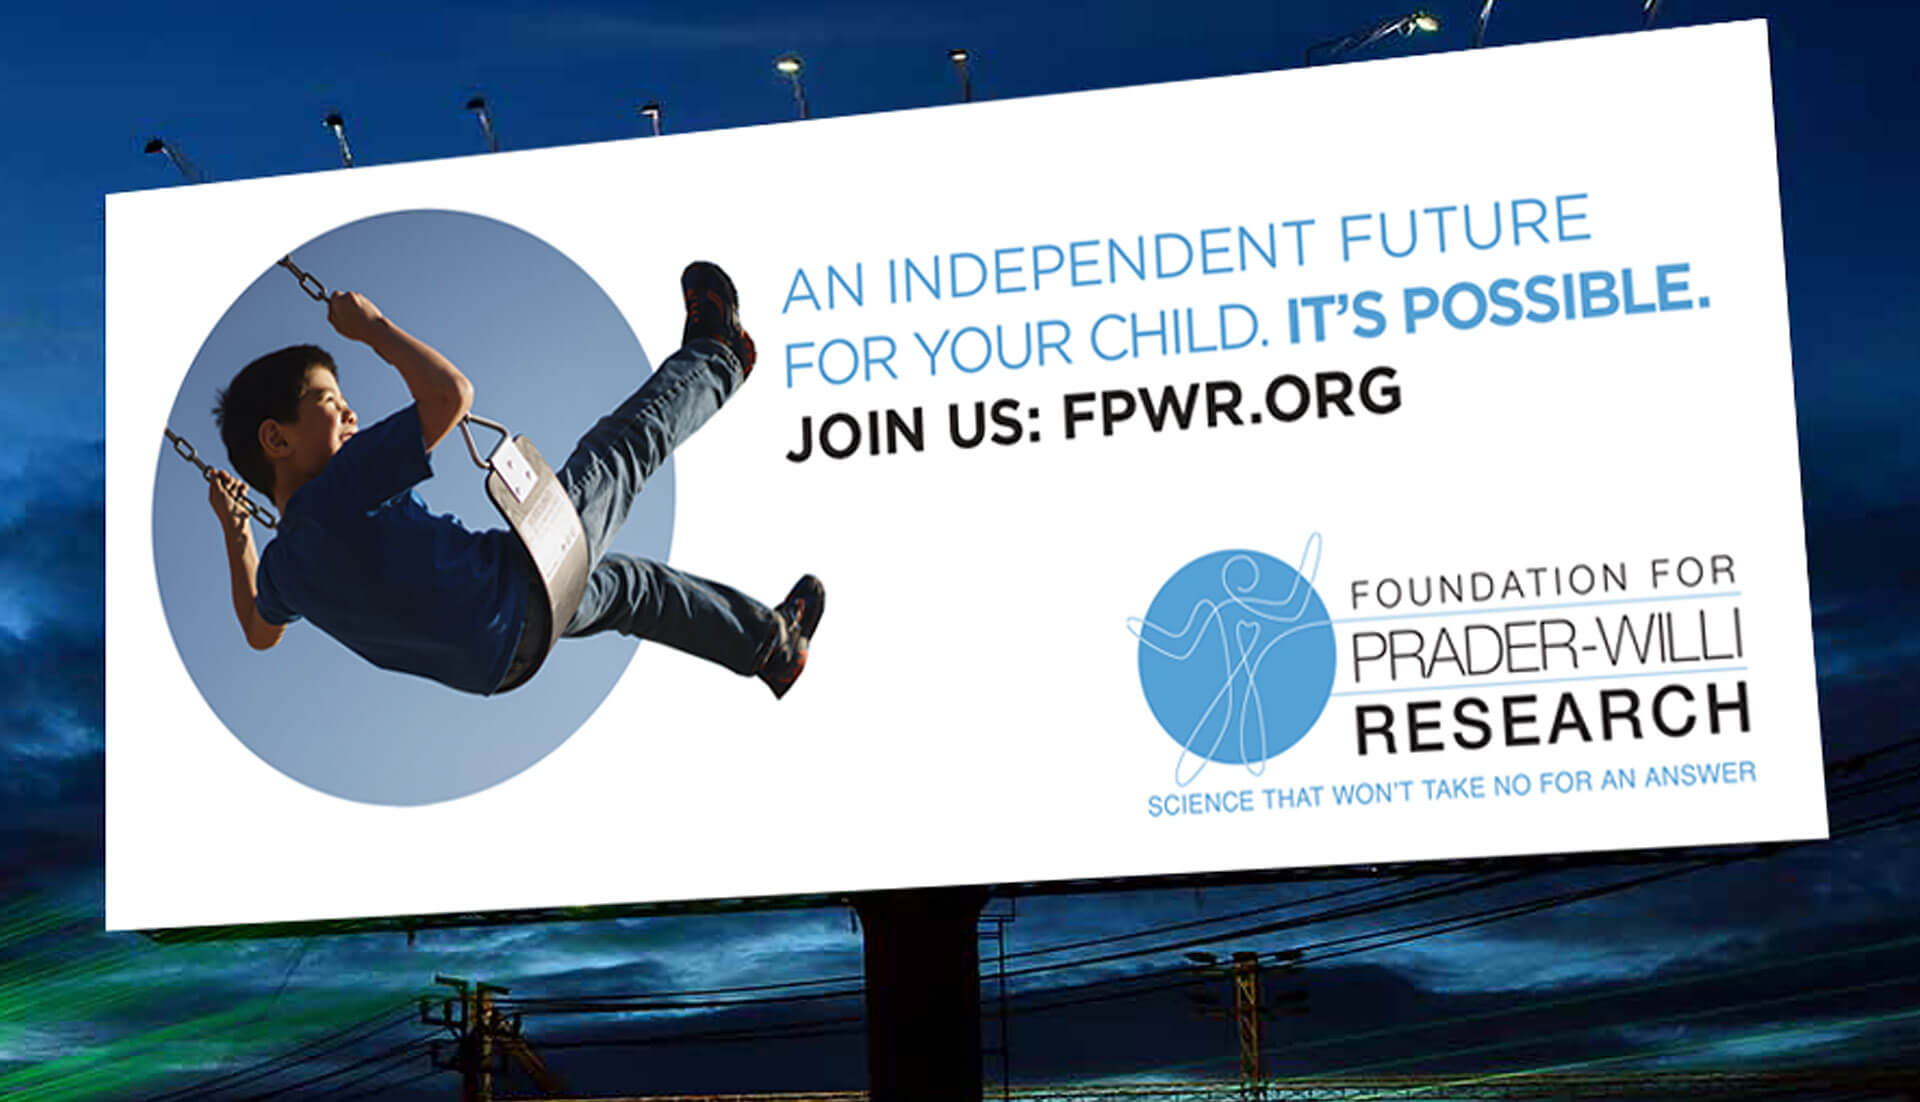 Foundation for Prader-Willi Research.Science that won't take no for an answer.